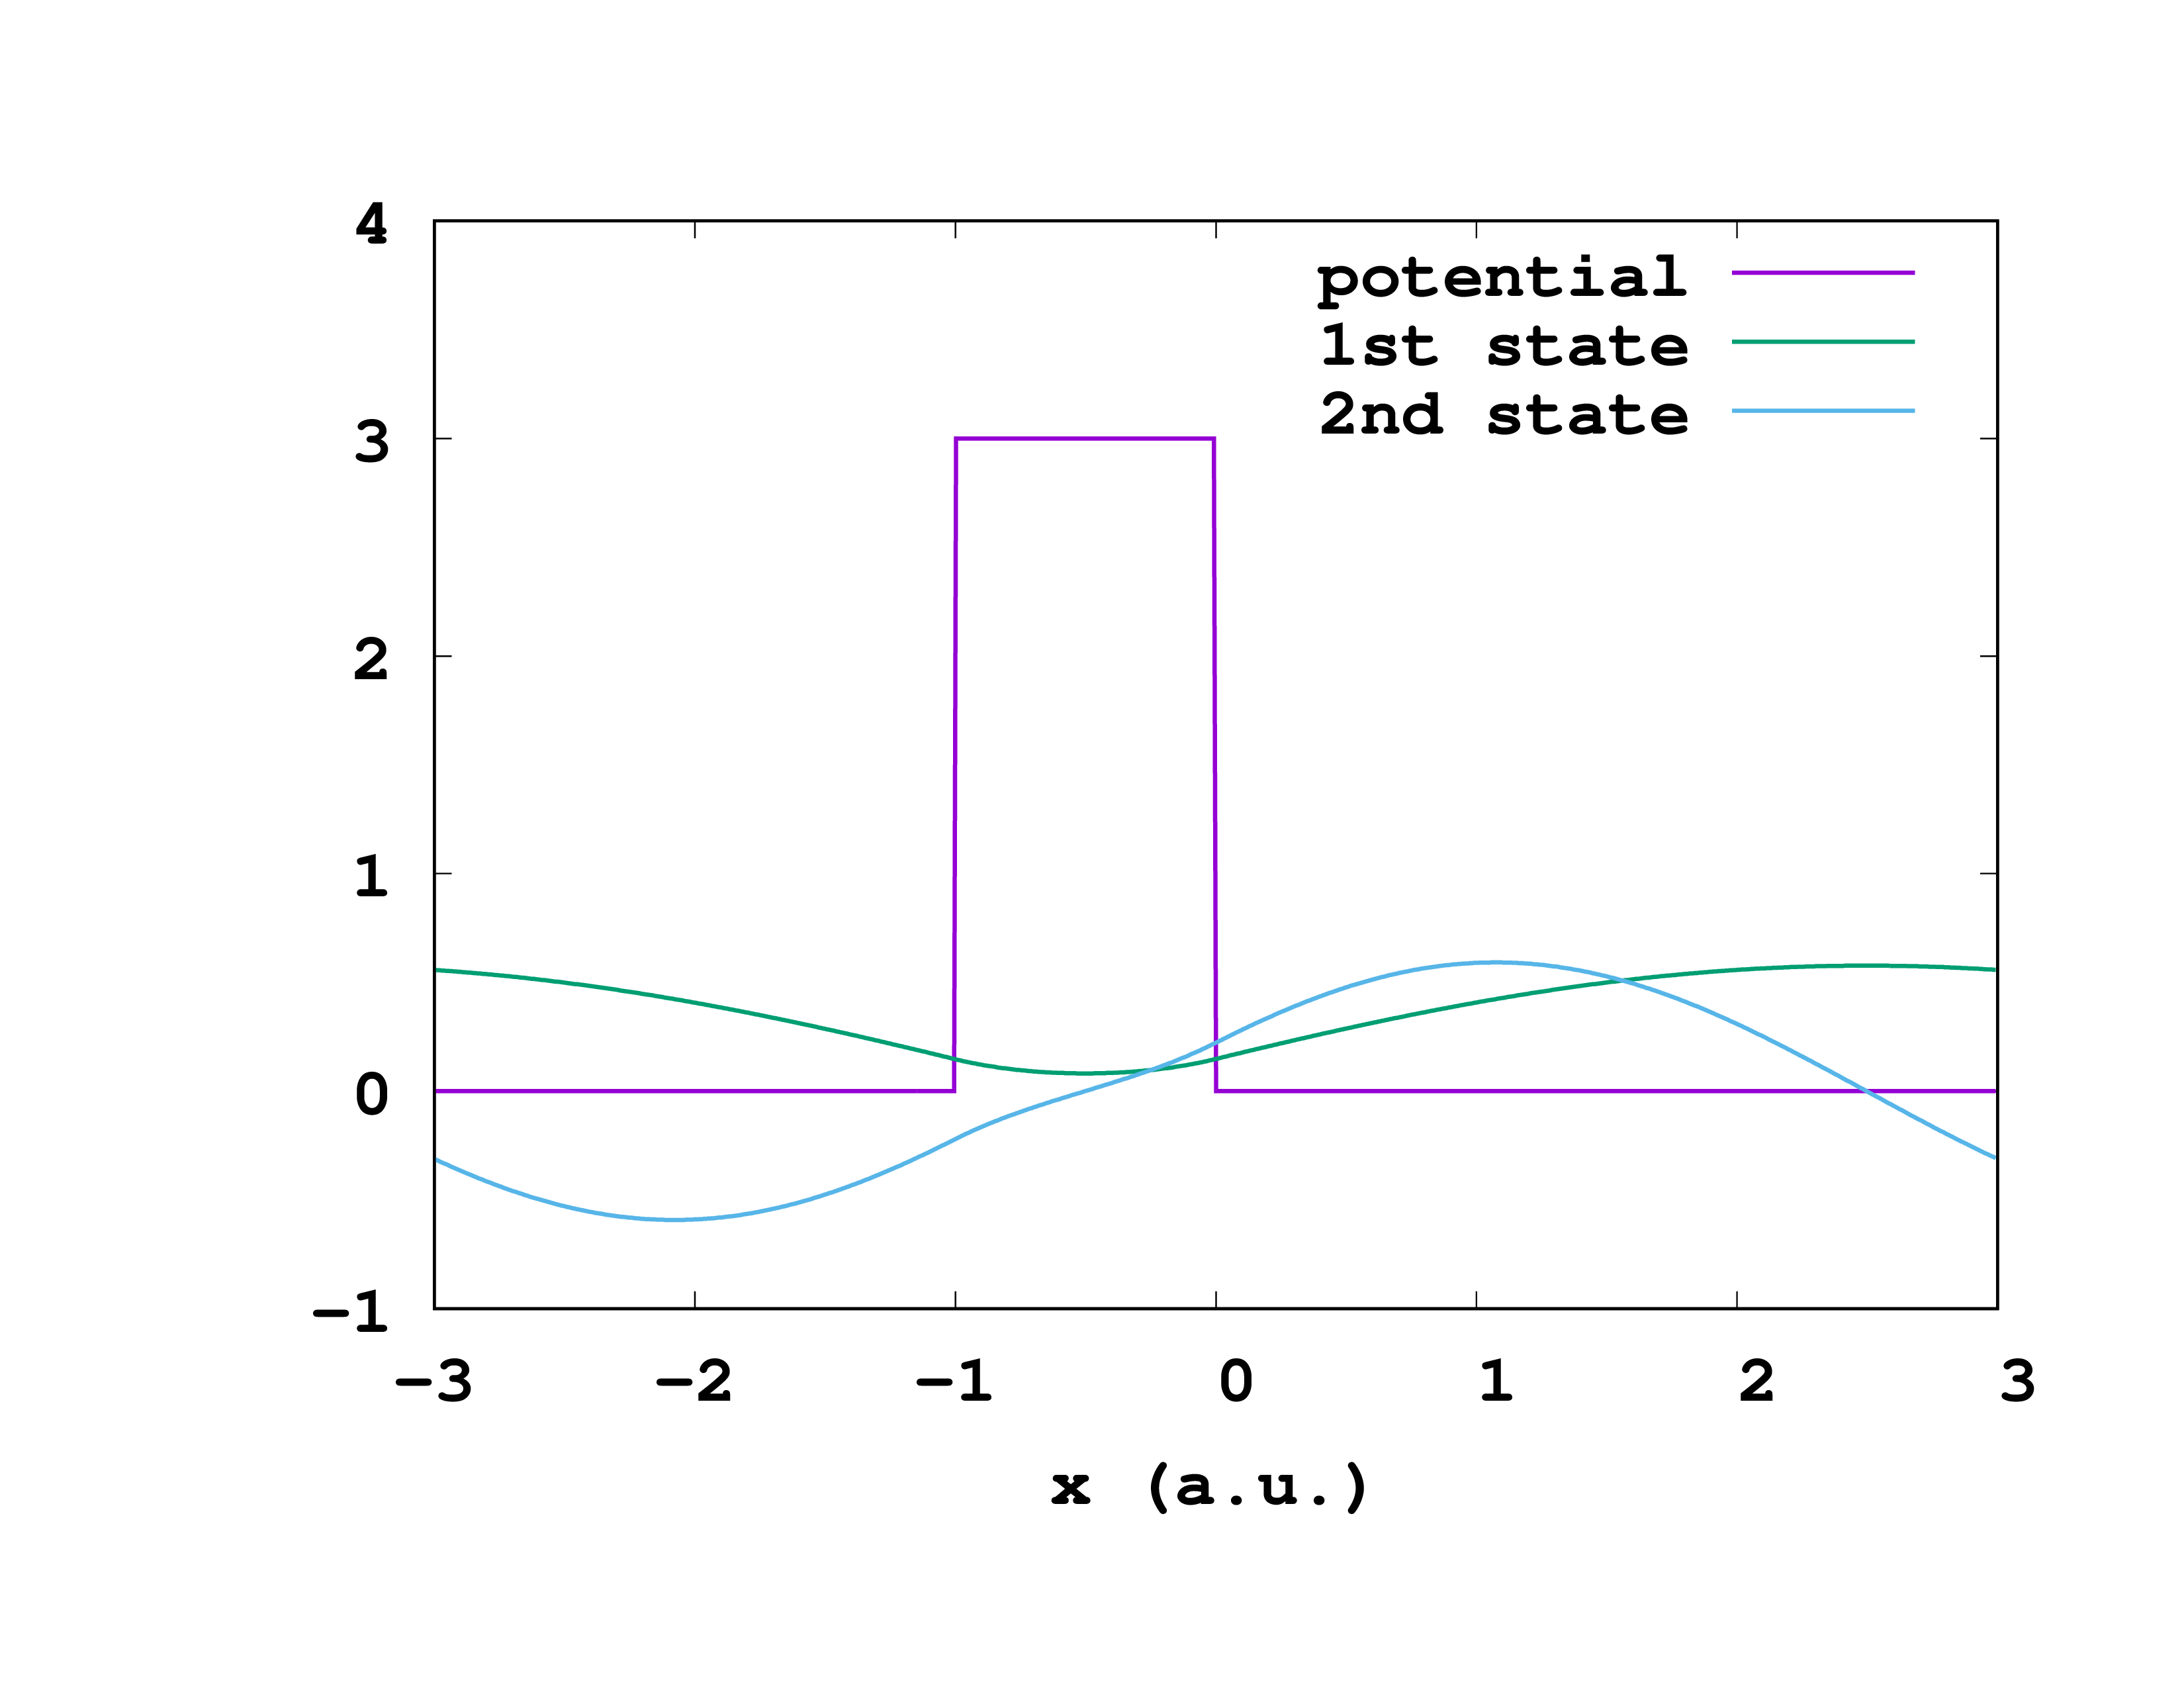 The first two wavefunctions plotted alongside the potential.